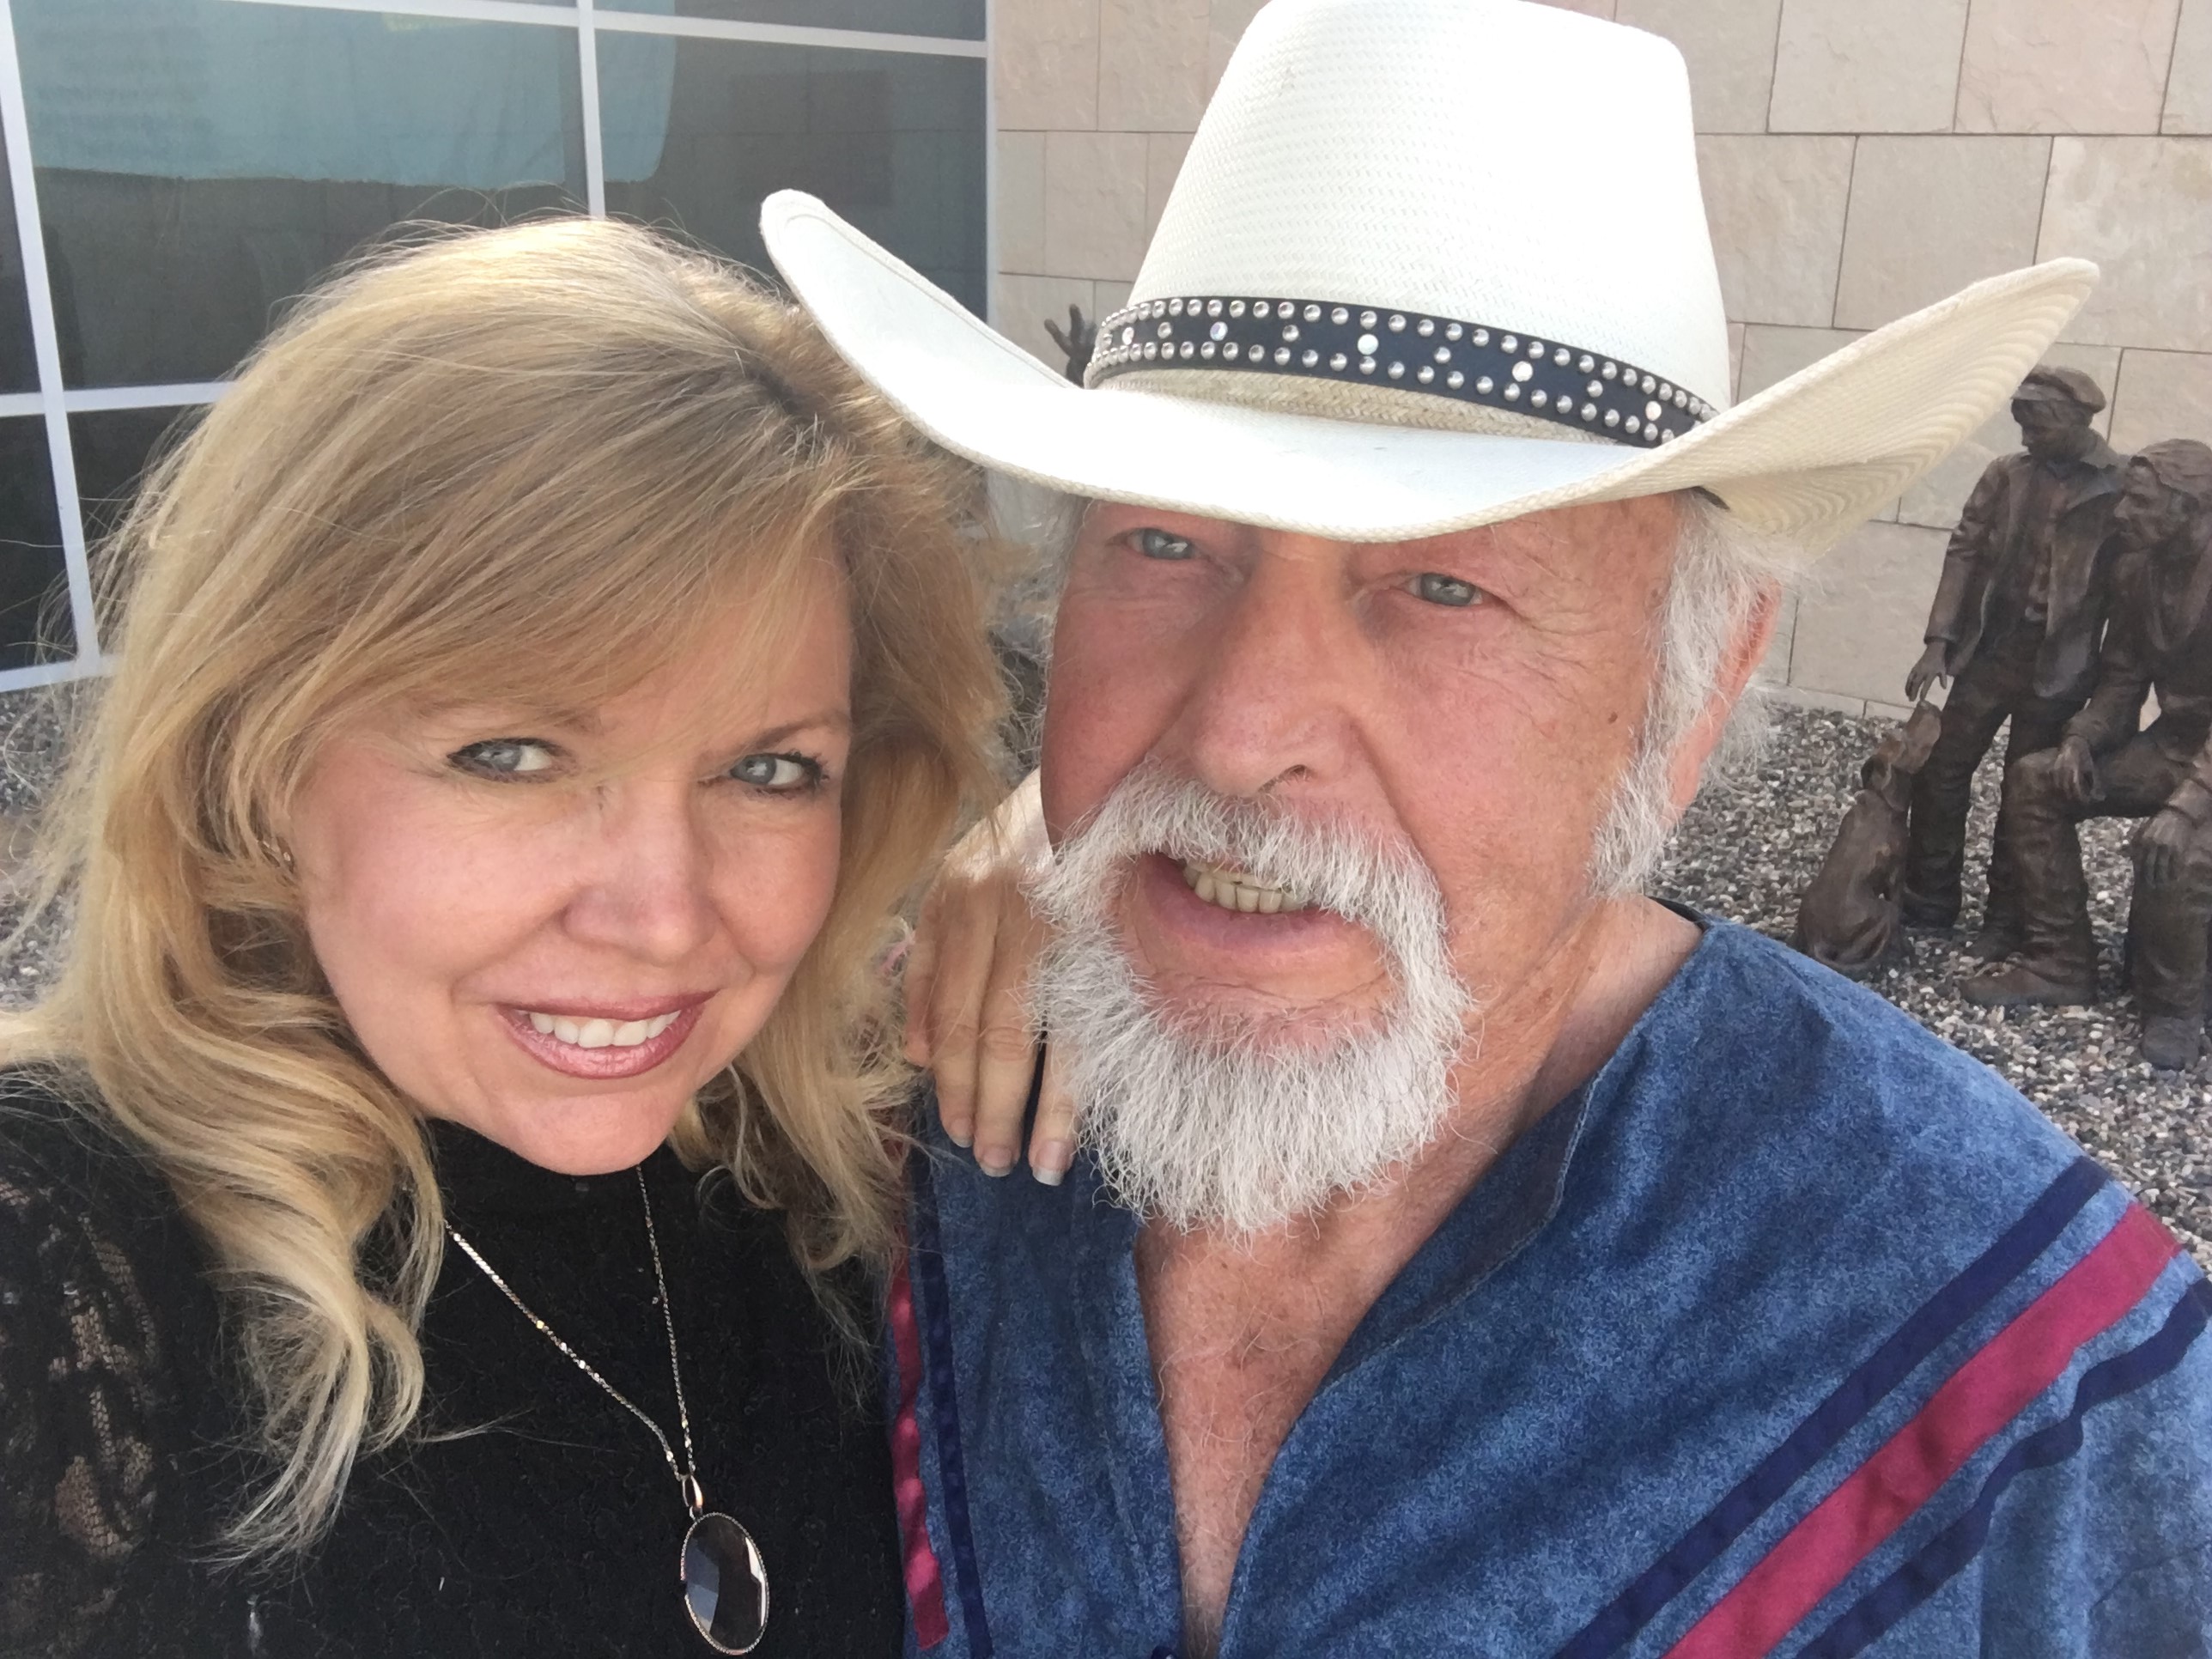 Romancing the West's singer/songwriter Christina Lynn Martin and cowboy balladeer Butch Martin are bringing their documentary concert / dinner-show to Rancho Los Cerritos Saturday June 22, 2019.